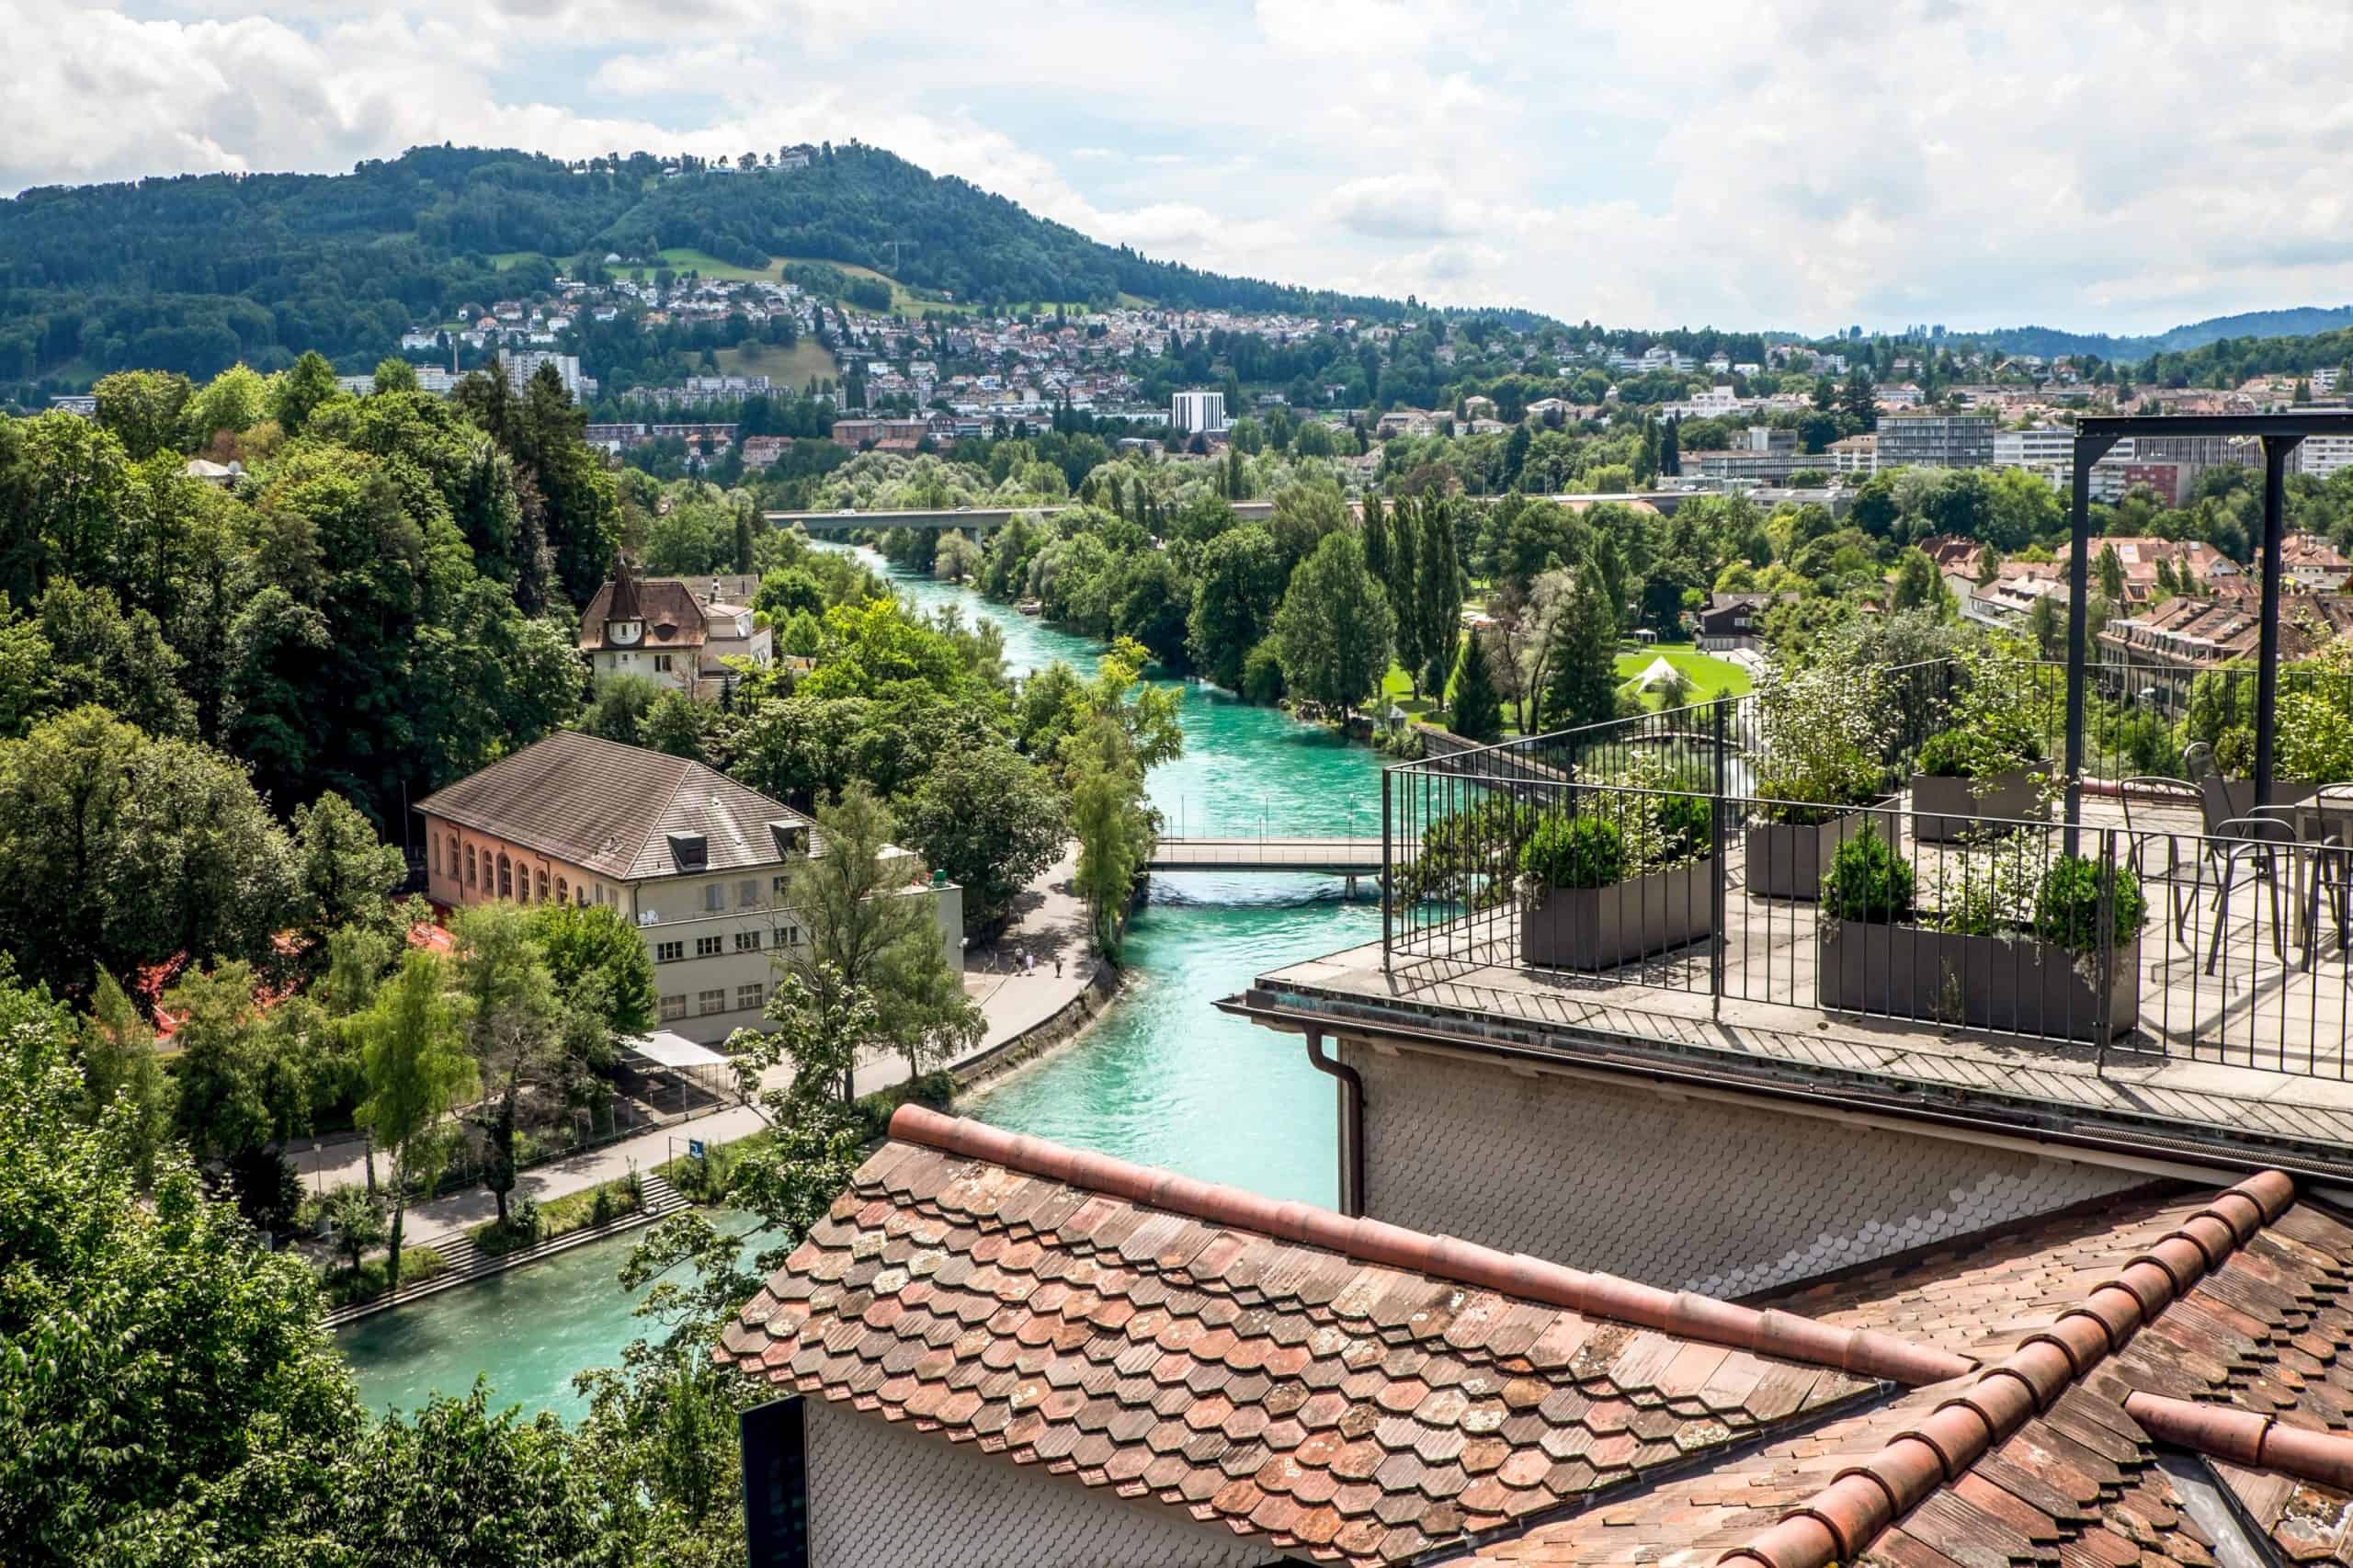 View of the bright aqua Aare river that flows through the city of Bern, Switzerland